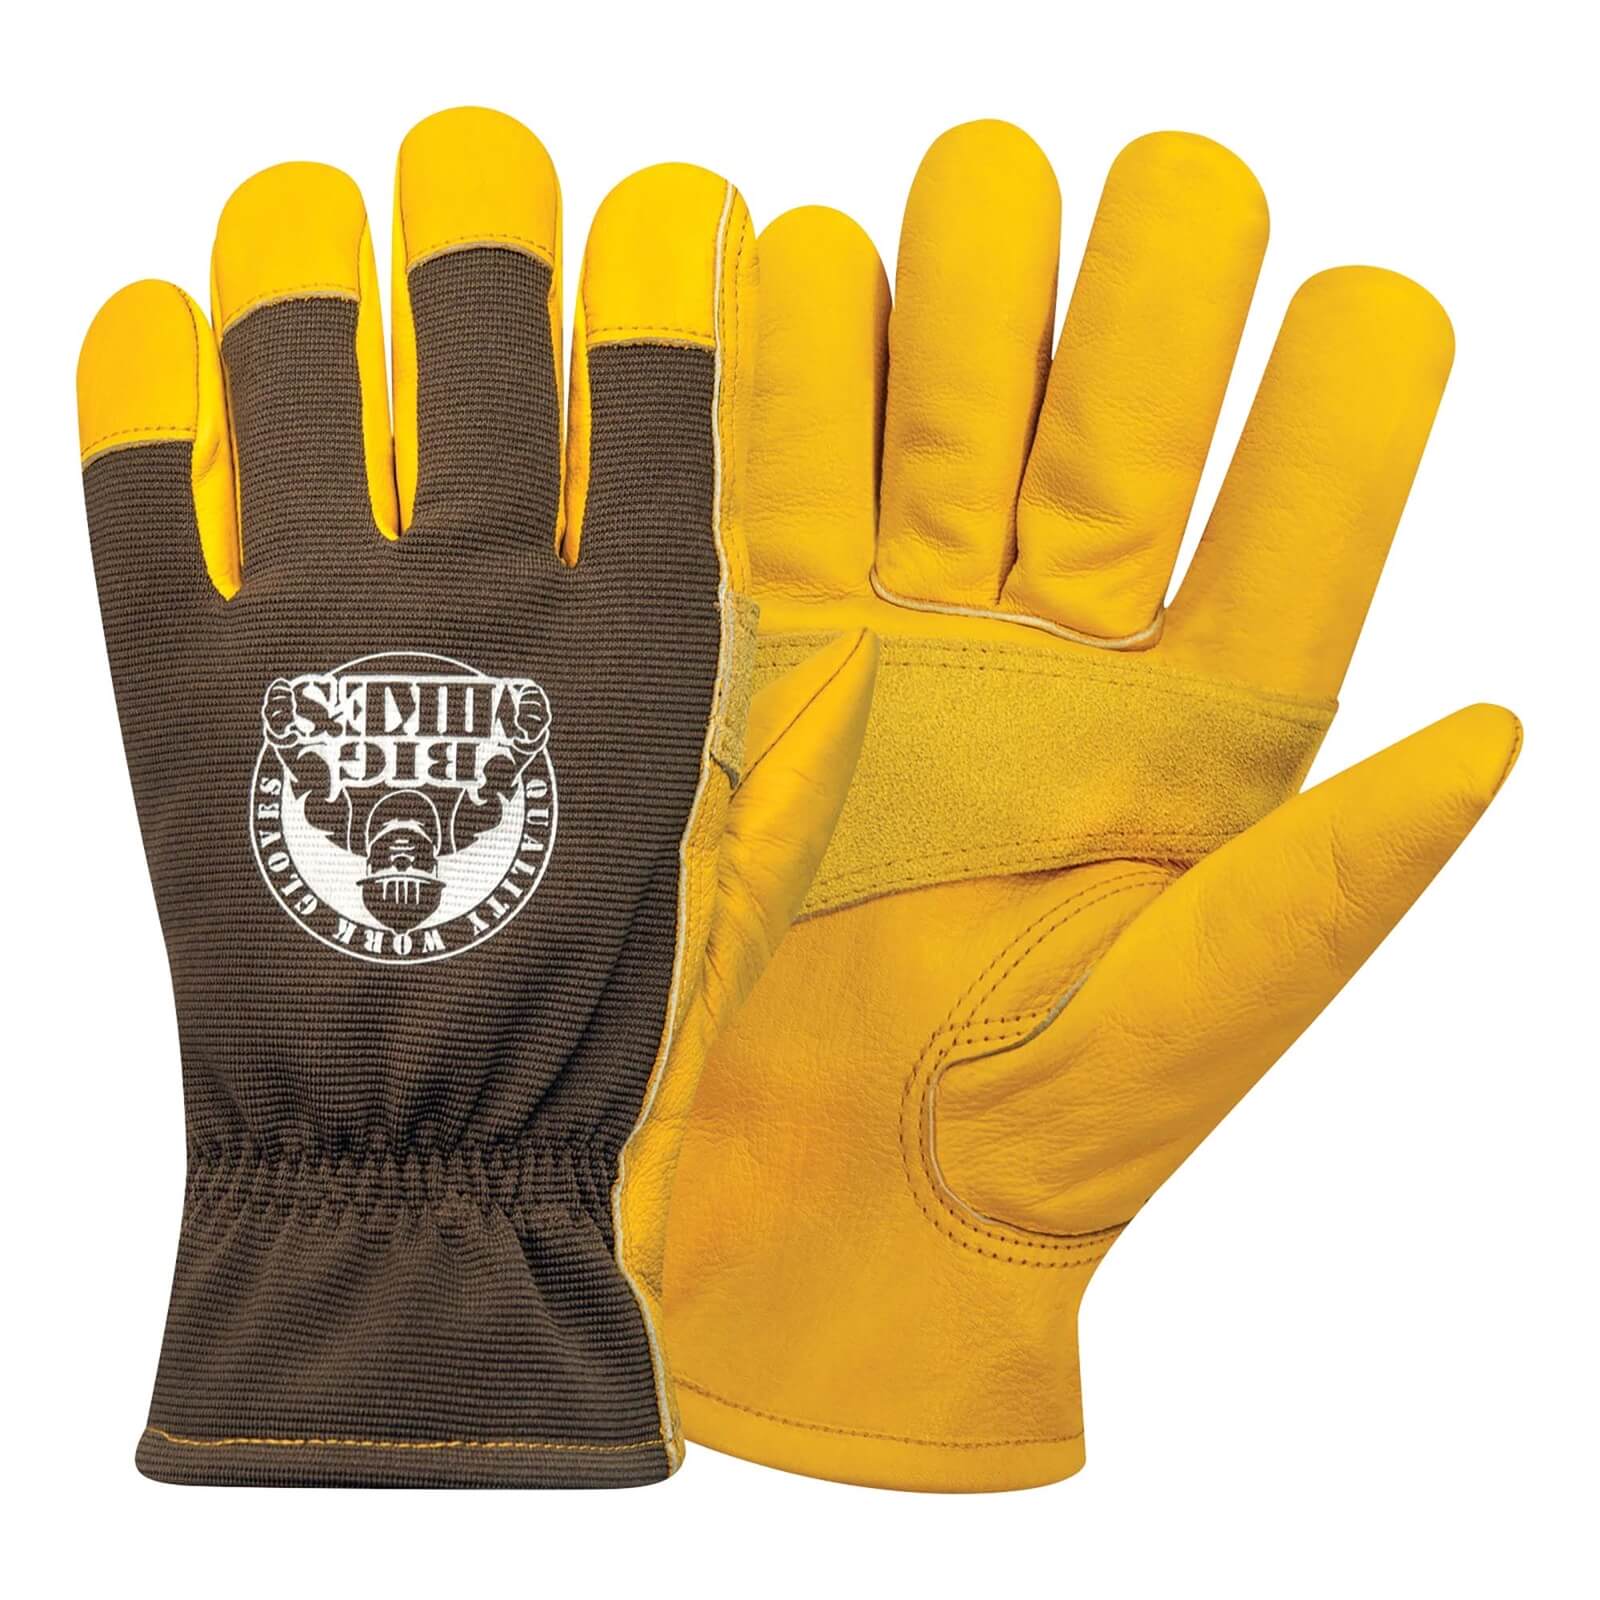 Big Mike's Leather Lined Winter Work Gloves - Medium